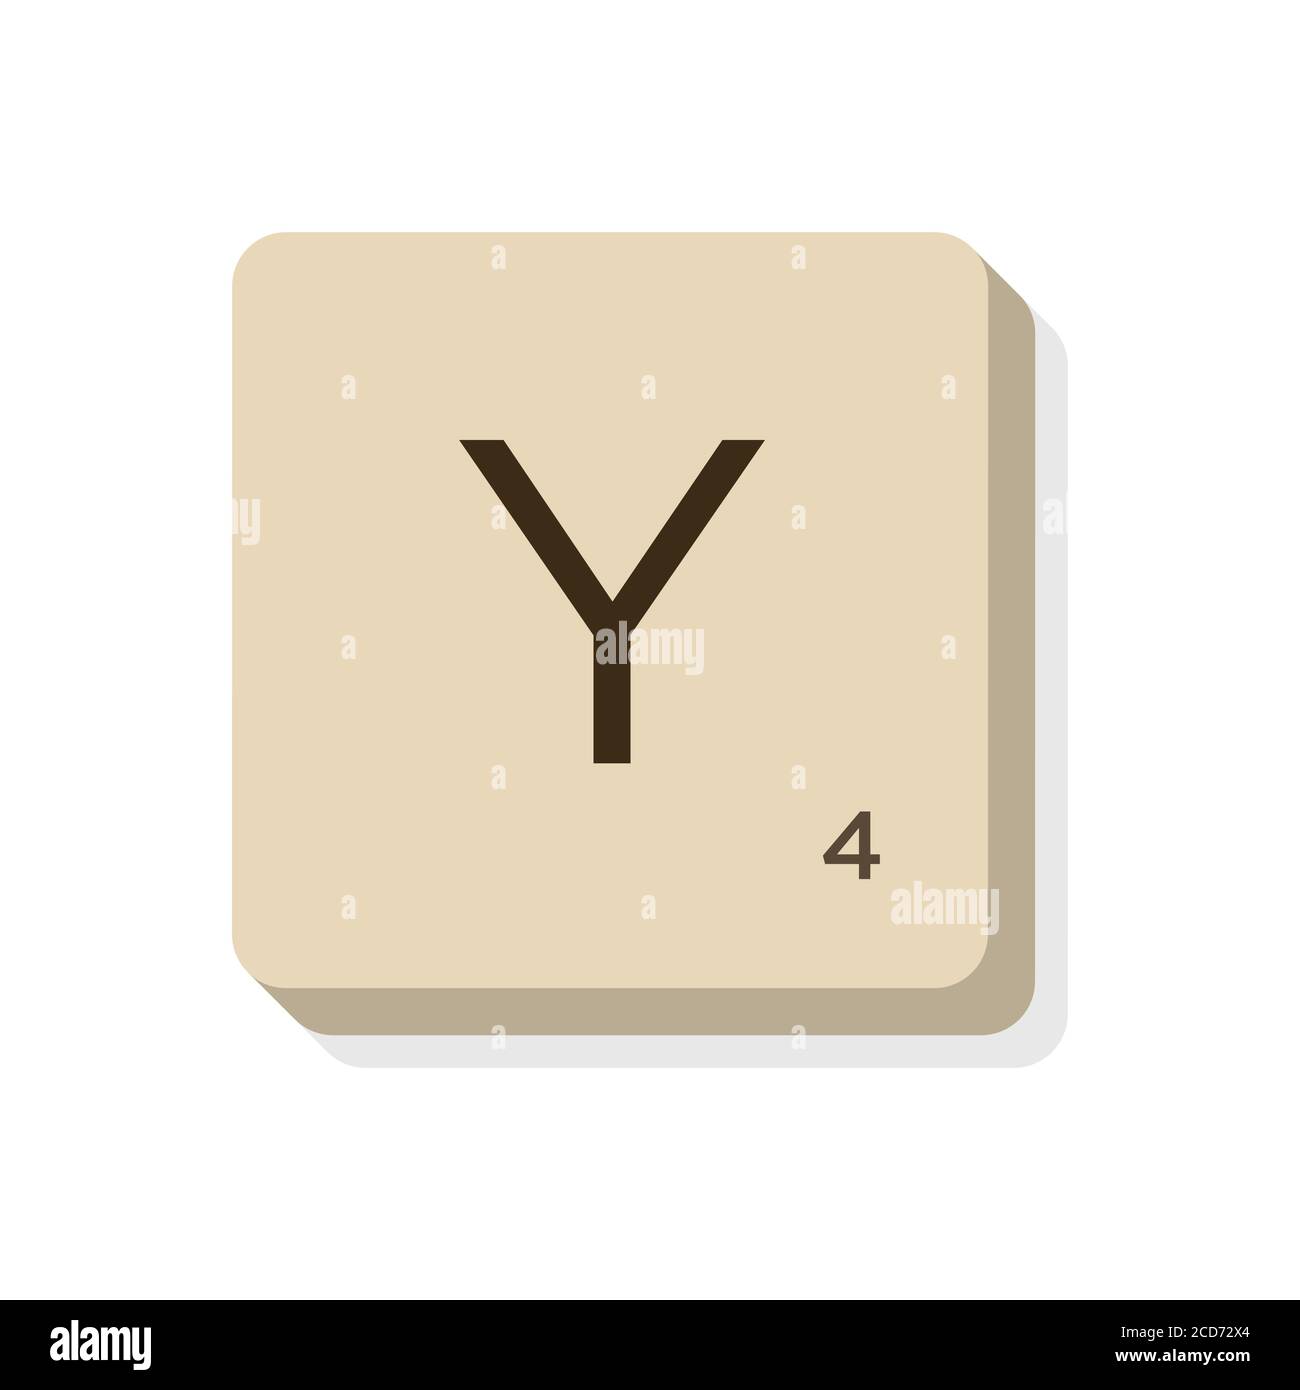 Letter Y in scrabble alphabet. Isolate vector illustration to compose your own words and phrases. Stock Vector